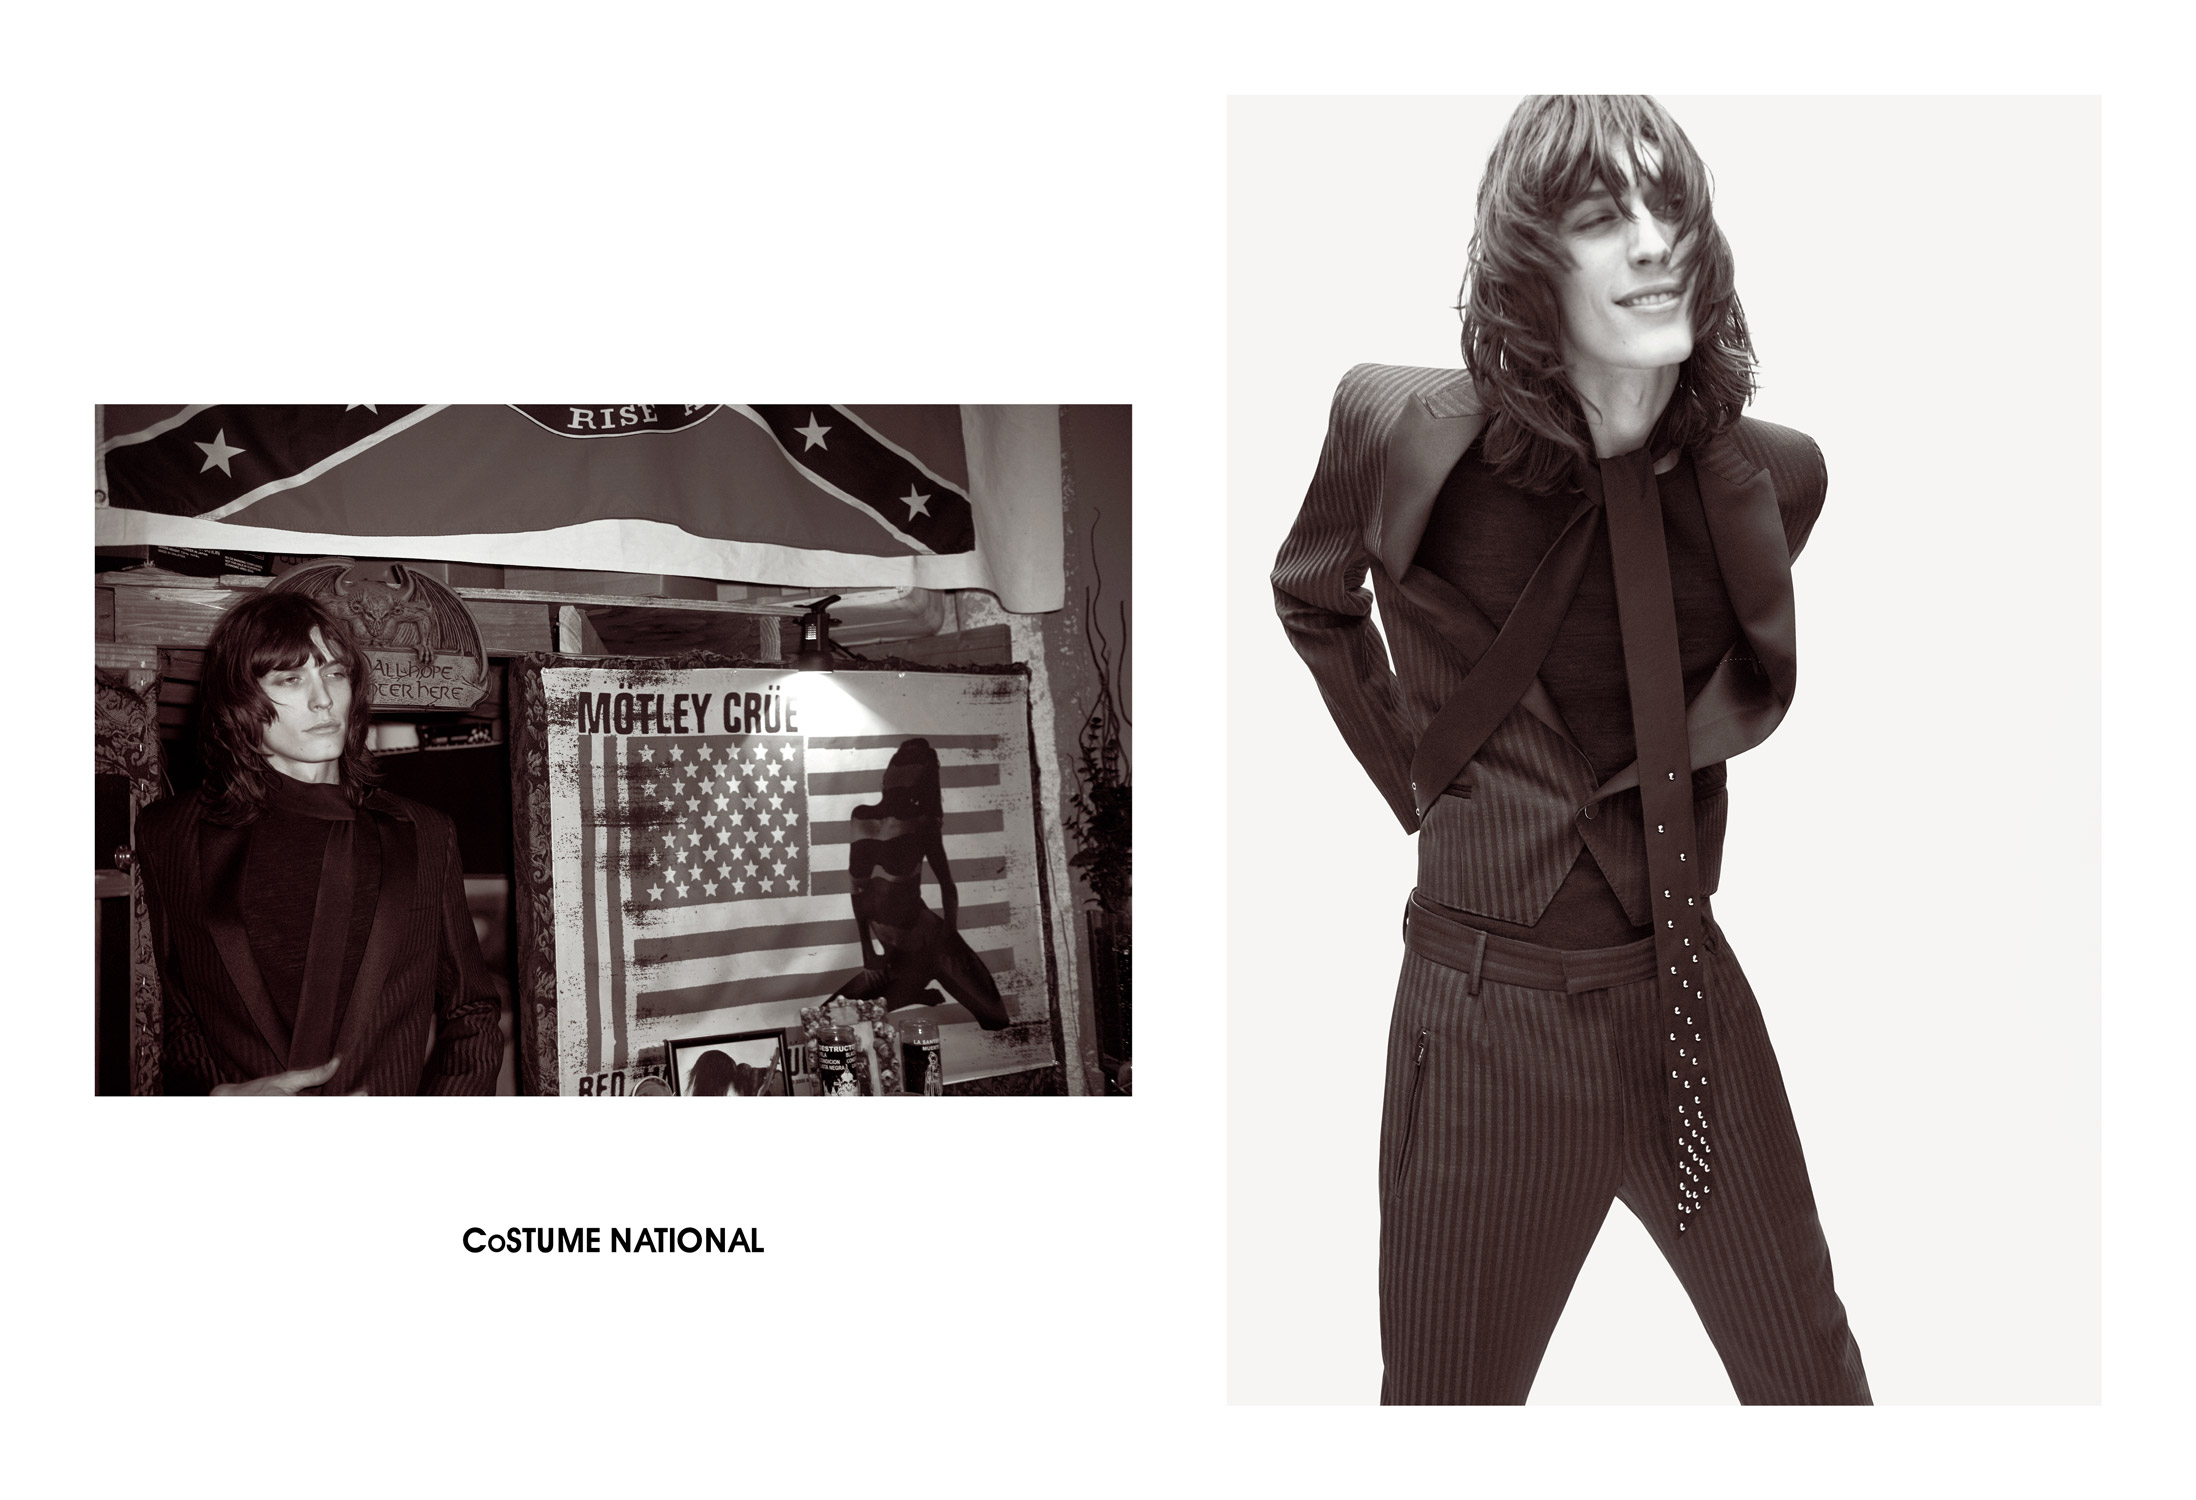 Costume National Fall/Winter 2015 Campaign Embraces Classic Rock Aesthetic